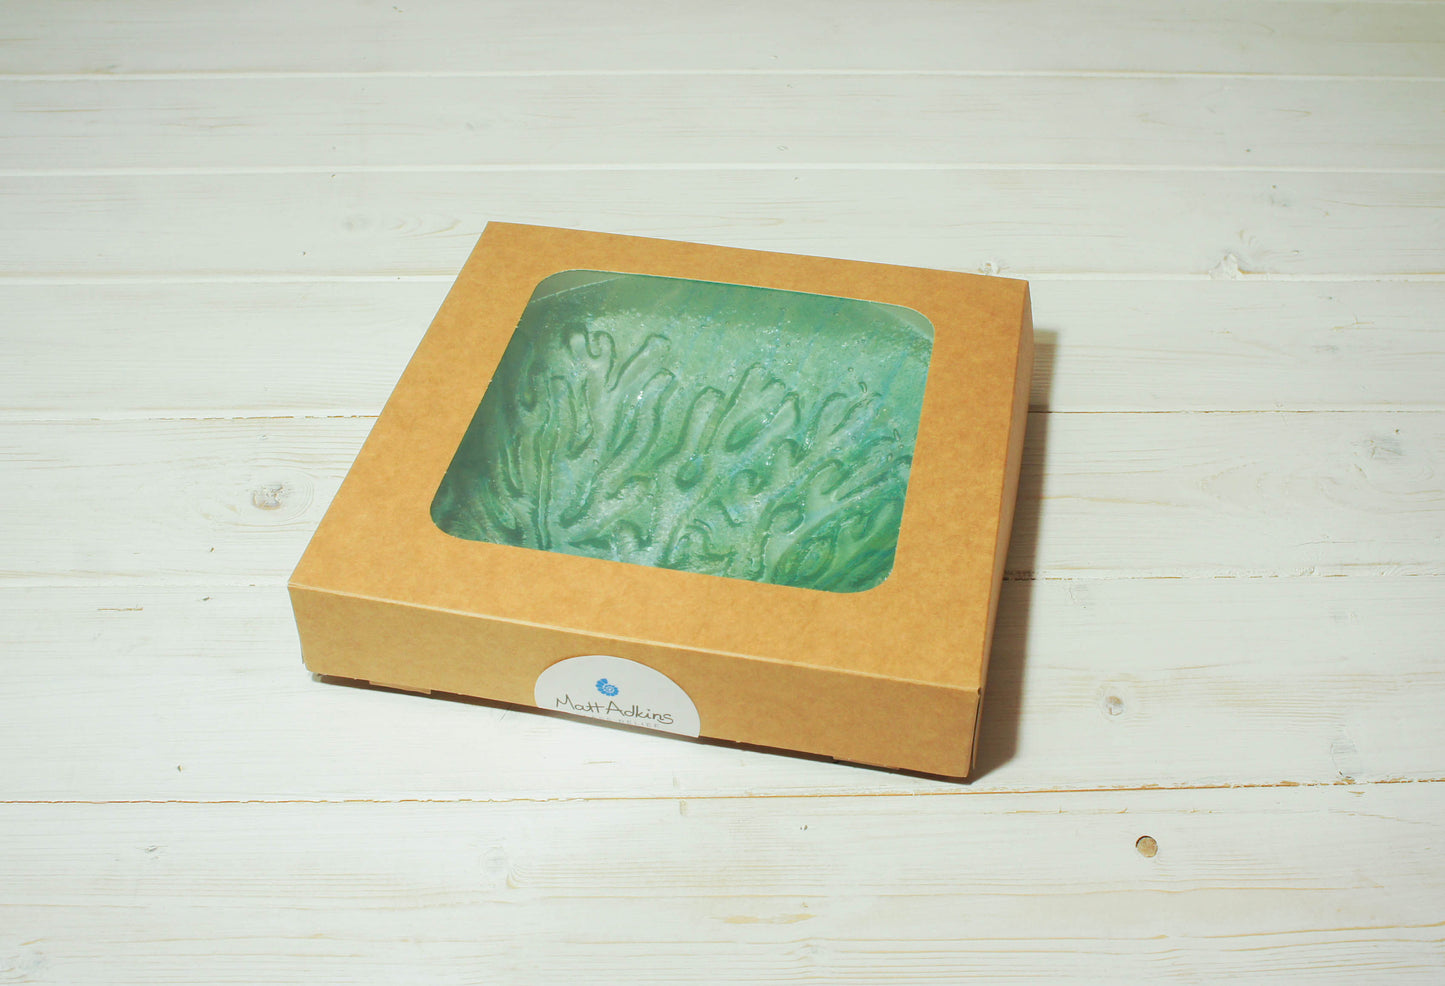 Small Coral Bowl - Turquoise - 20cm(8")